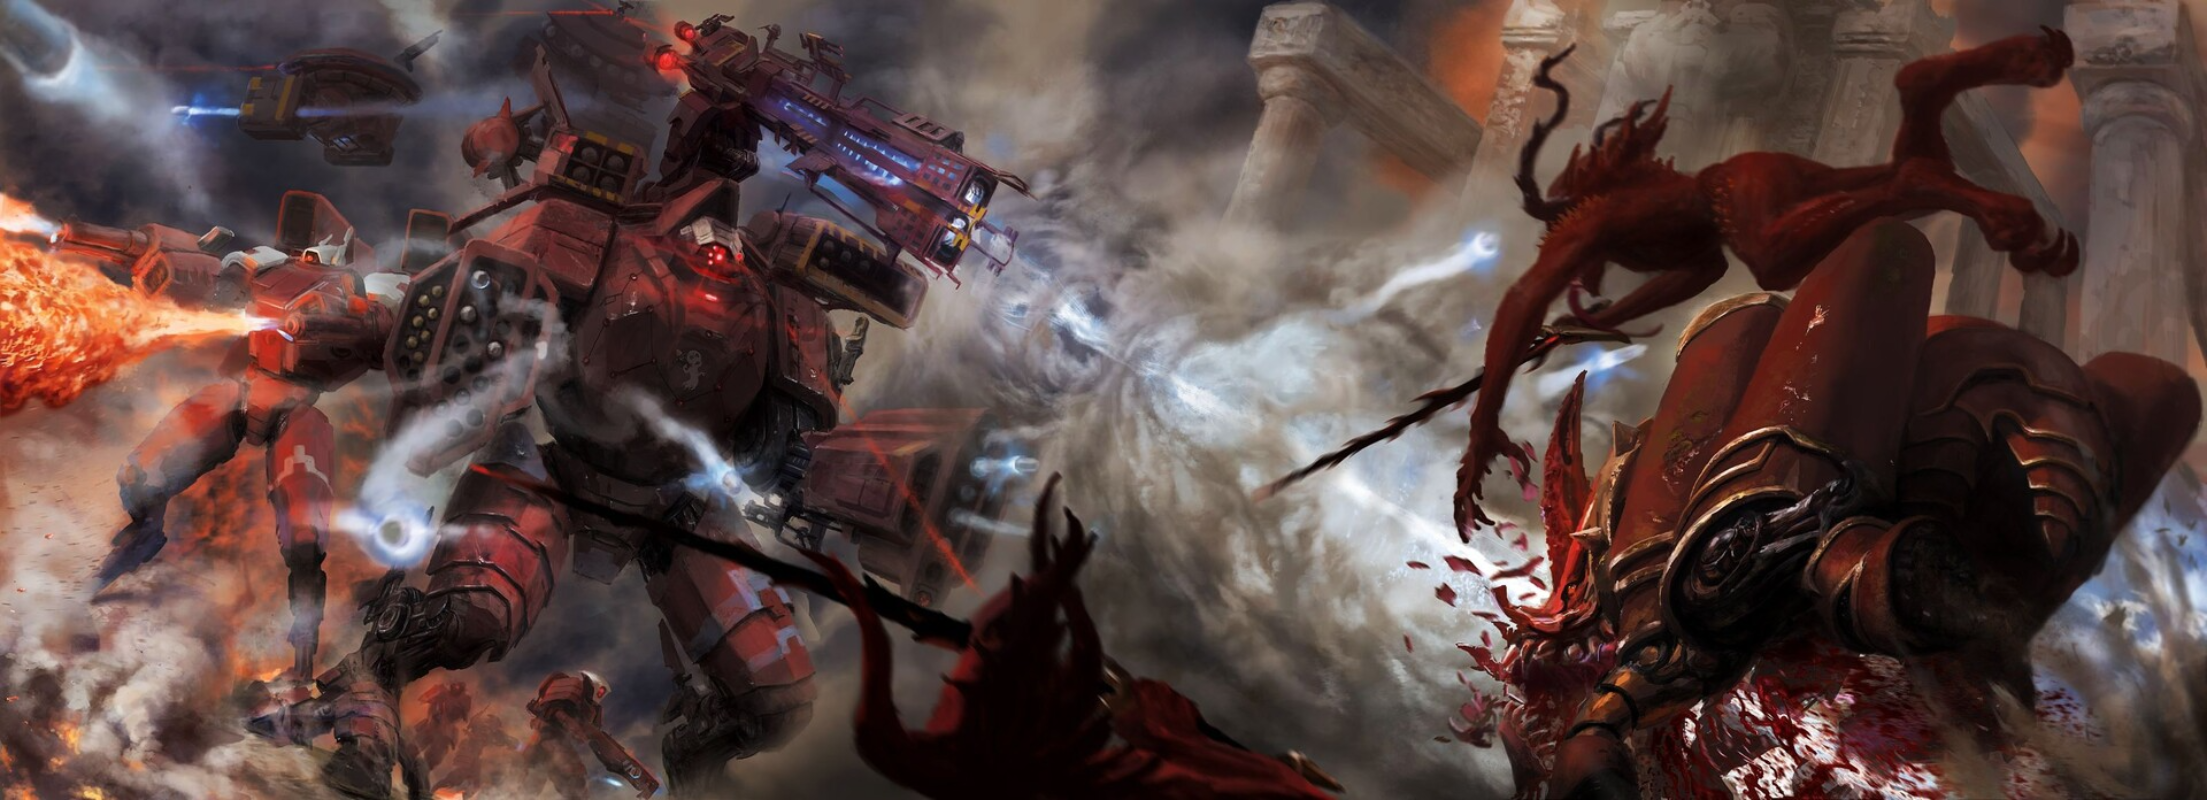 Warhammer Warhammer 30 000 Warhammer 40 000 Tau Tau Empire Farsight Enclaves Red Black White Science 2207x800